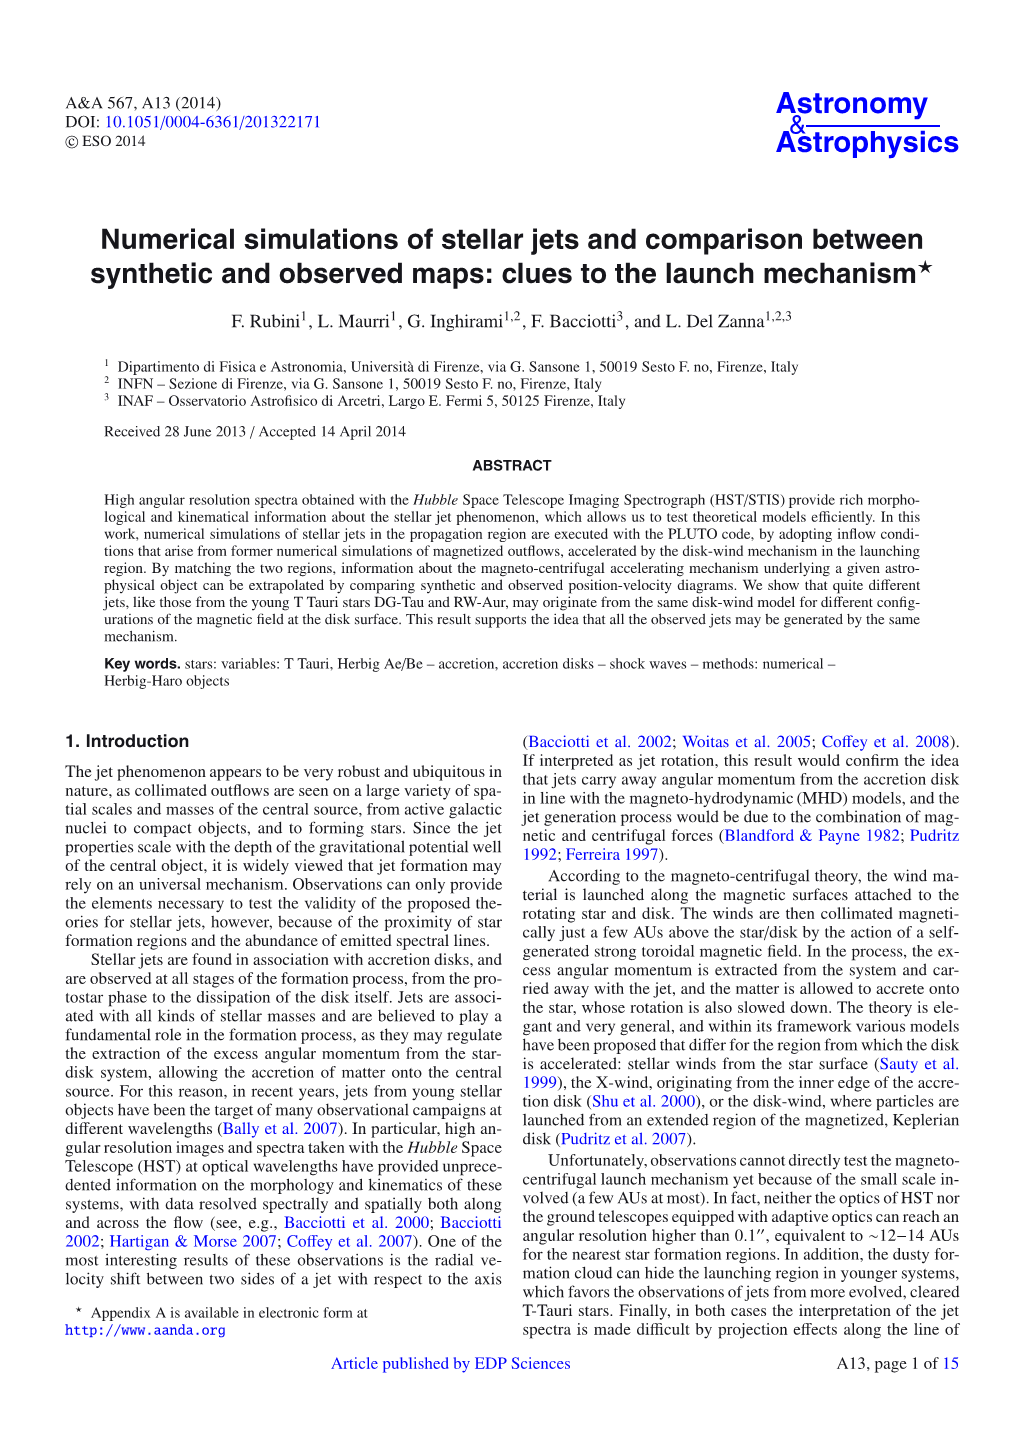 Numerical Simulations of Stellar Jets and Comparison Between Synthetic and Observed Maps: Clues to the Launch Mechanism